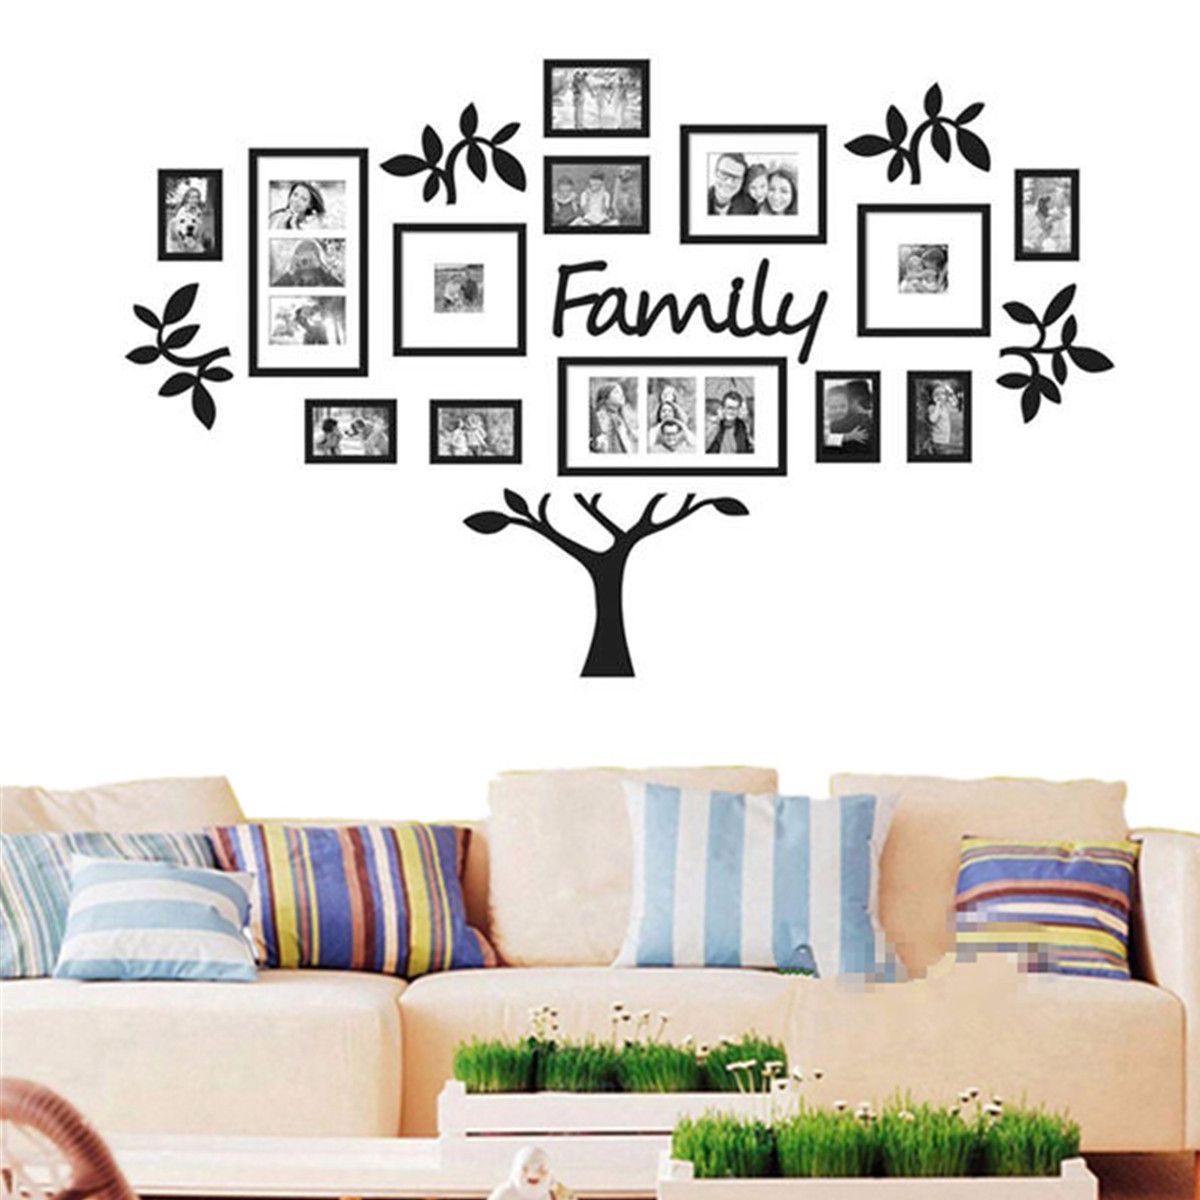 Acryli-Photo-Frame-Family-Tree-Picture-Collage-Wall-Art-Hanging-Sticker-Home-Decor-1520788